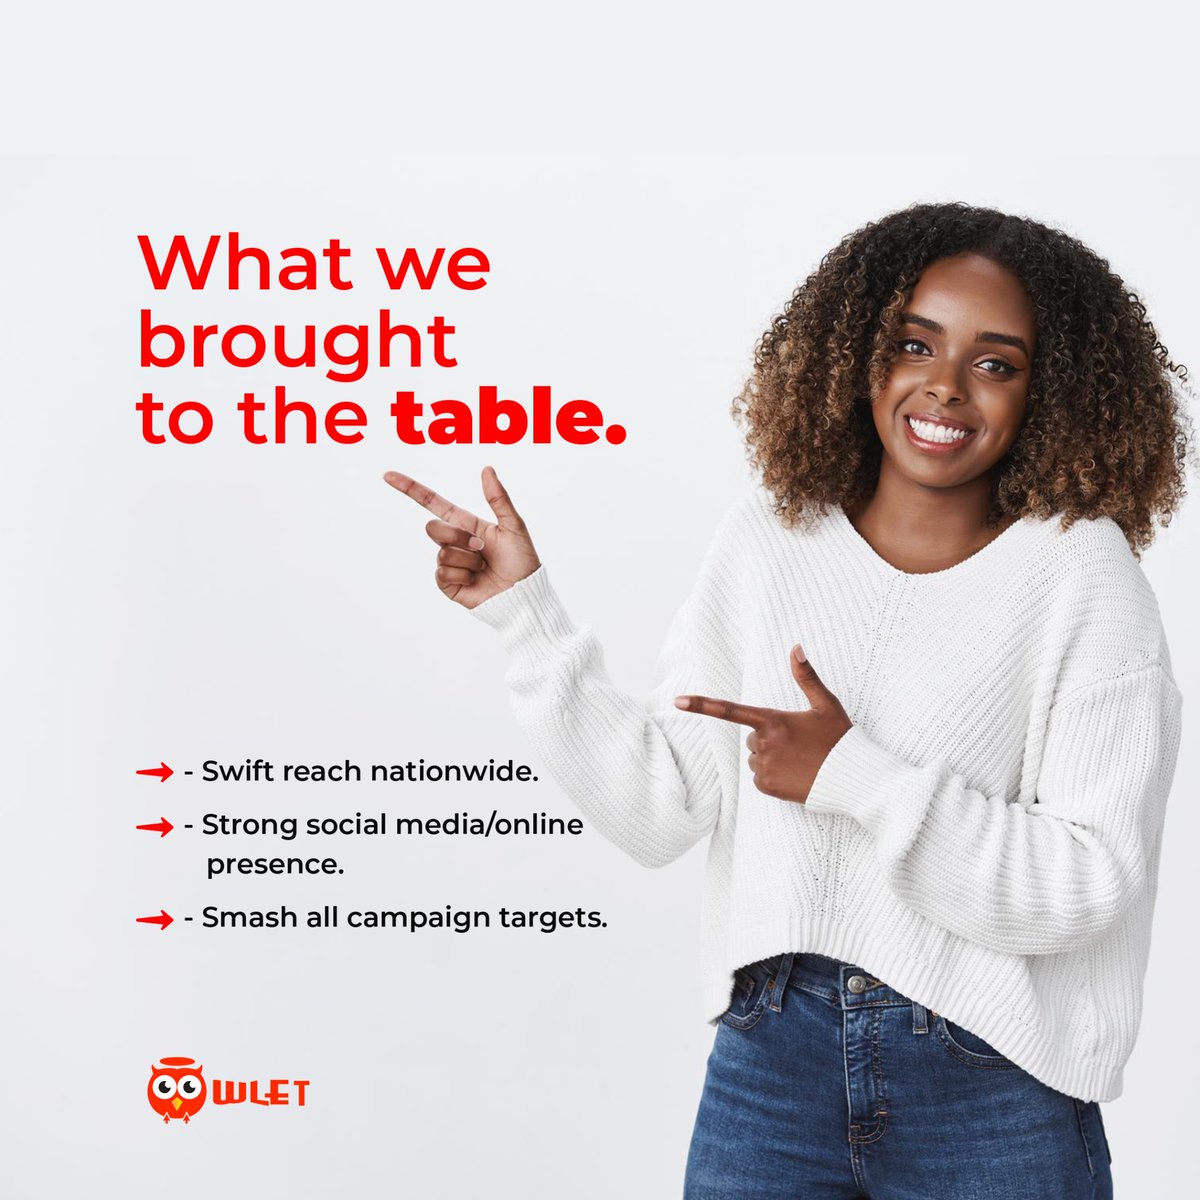 Stay ahead of the curve with Owlet Pro. The intuitive platform makes social media management a breeze, ensuring your success every step of the way. 
Visit owletpro.com Now!!
#OwletBoostsYou